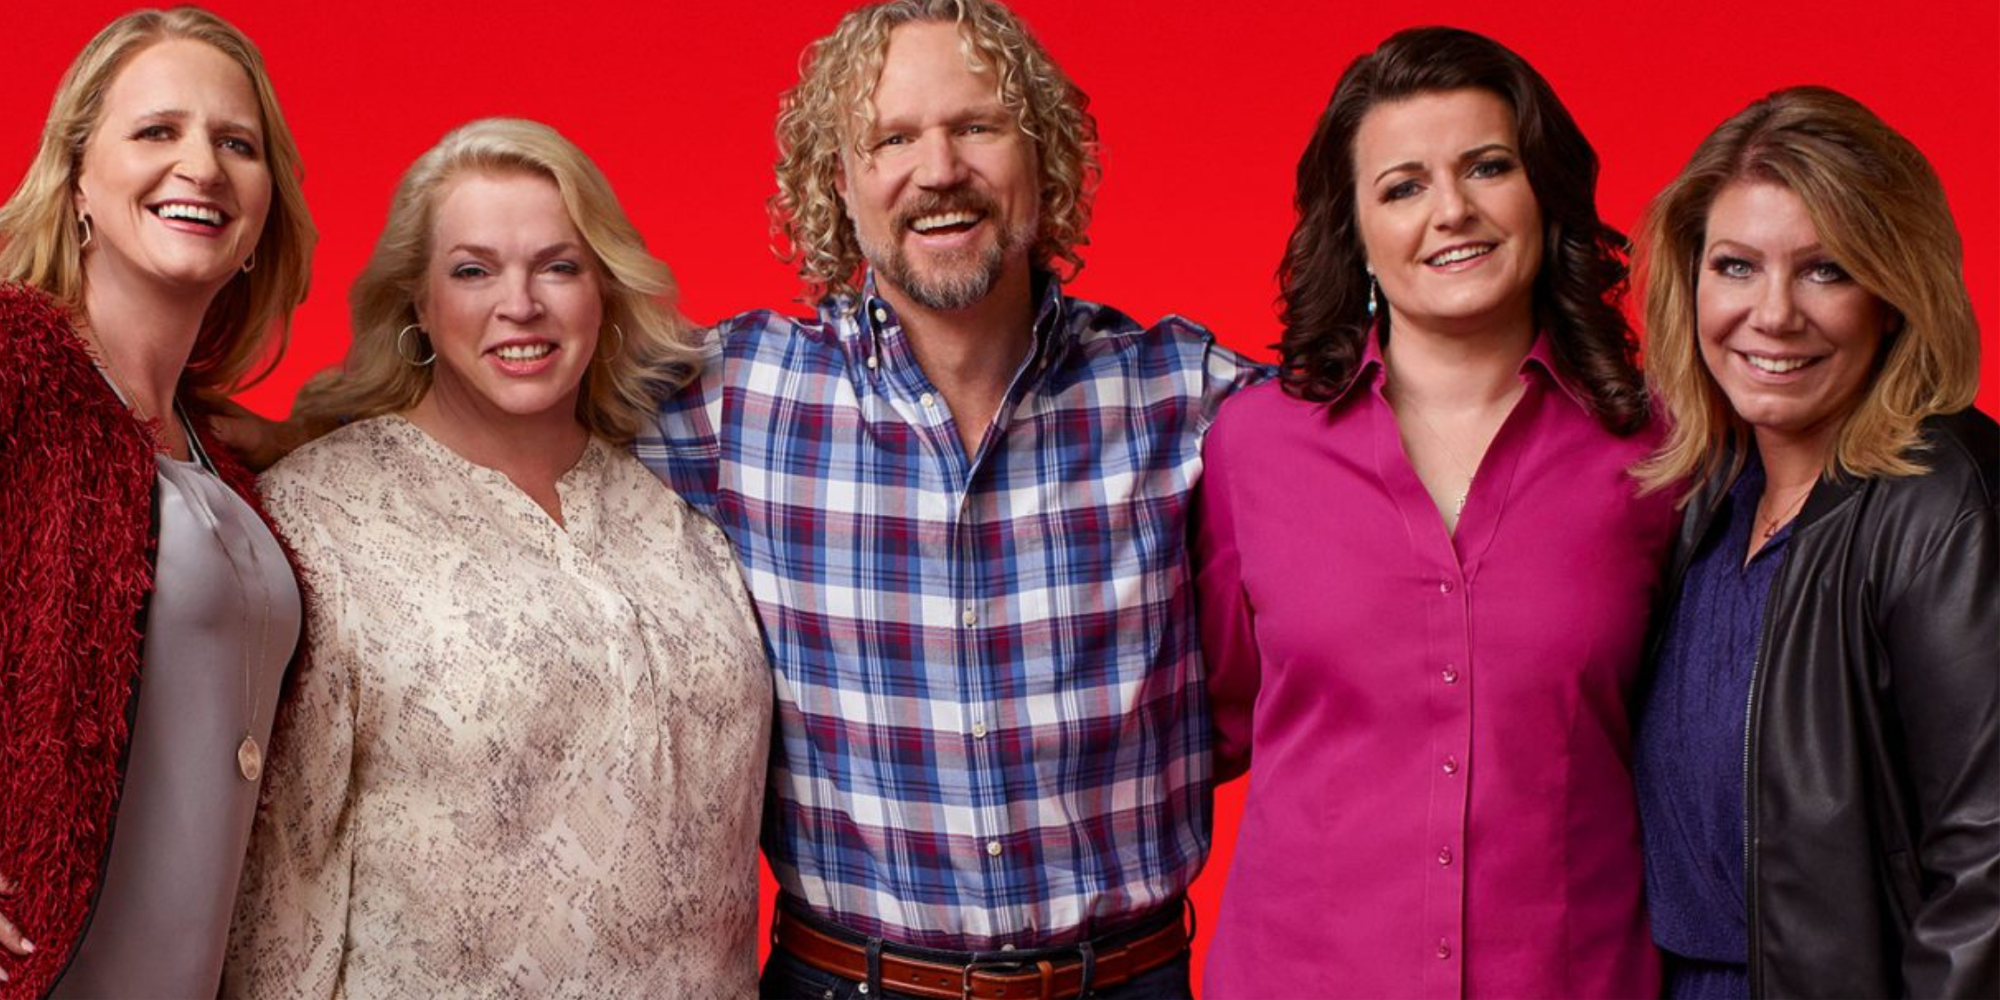 The cast of TLC's 'Sister Wives' in a group photo.